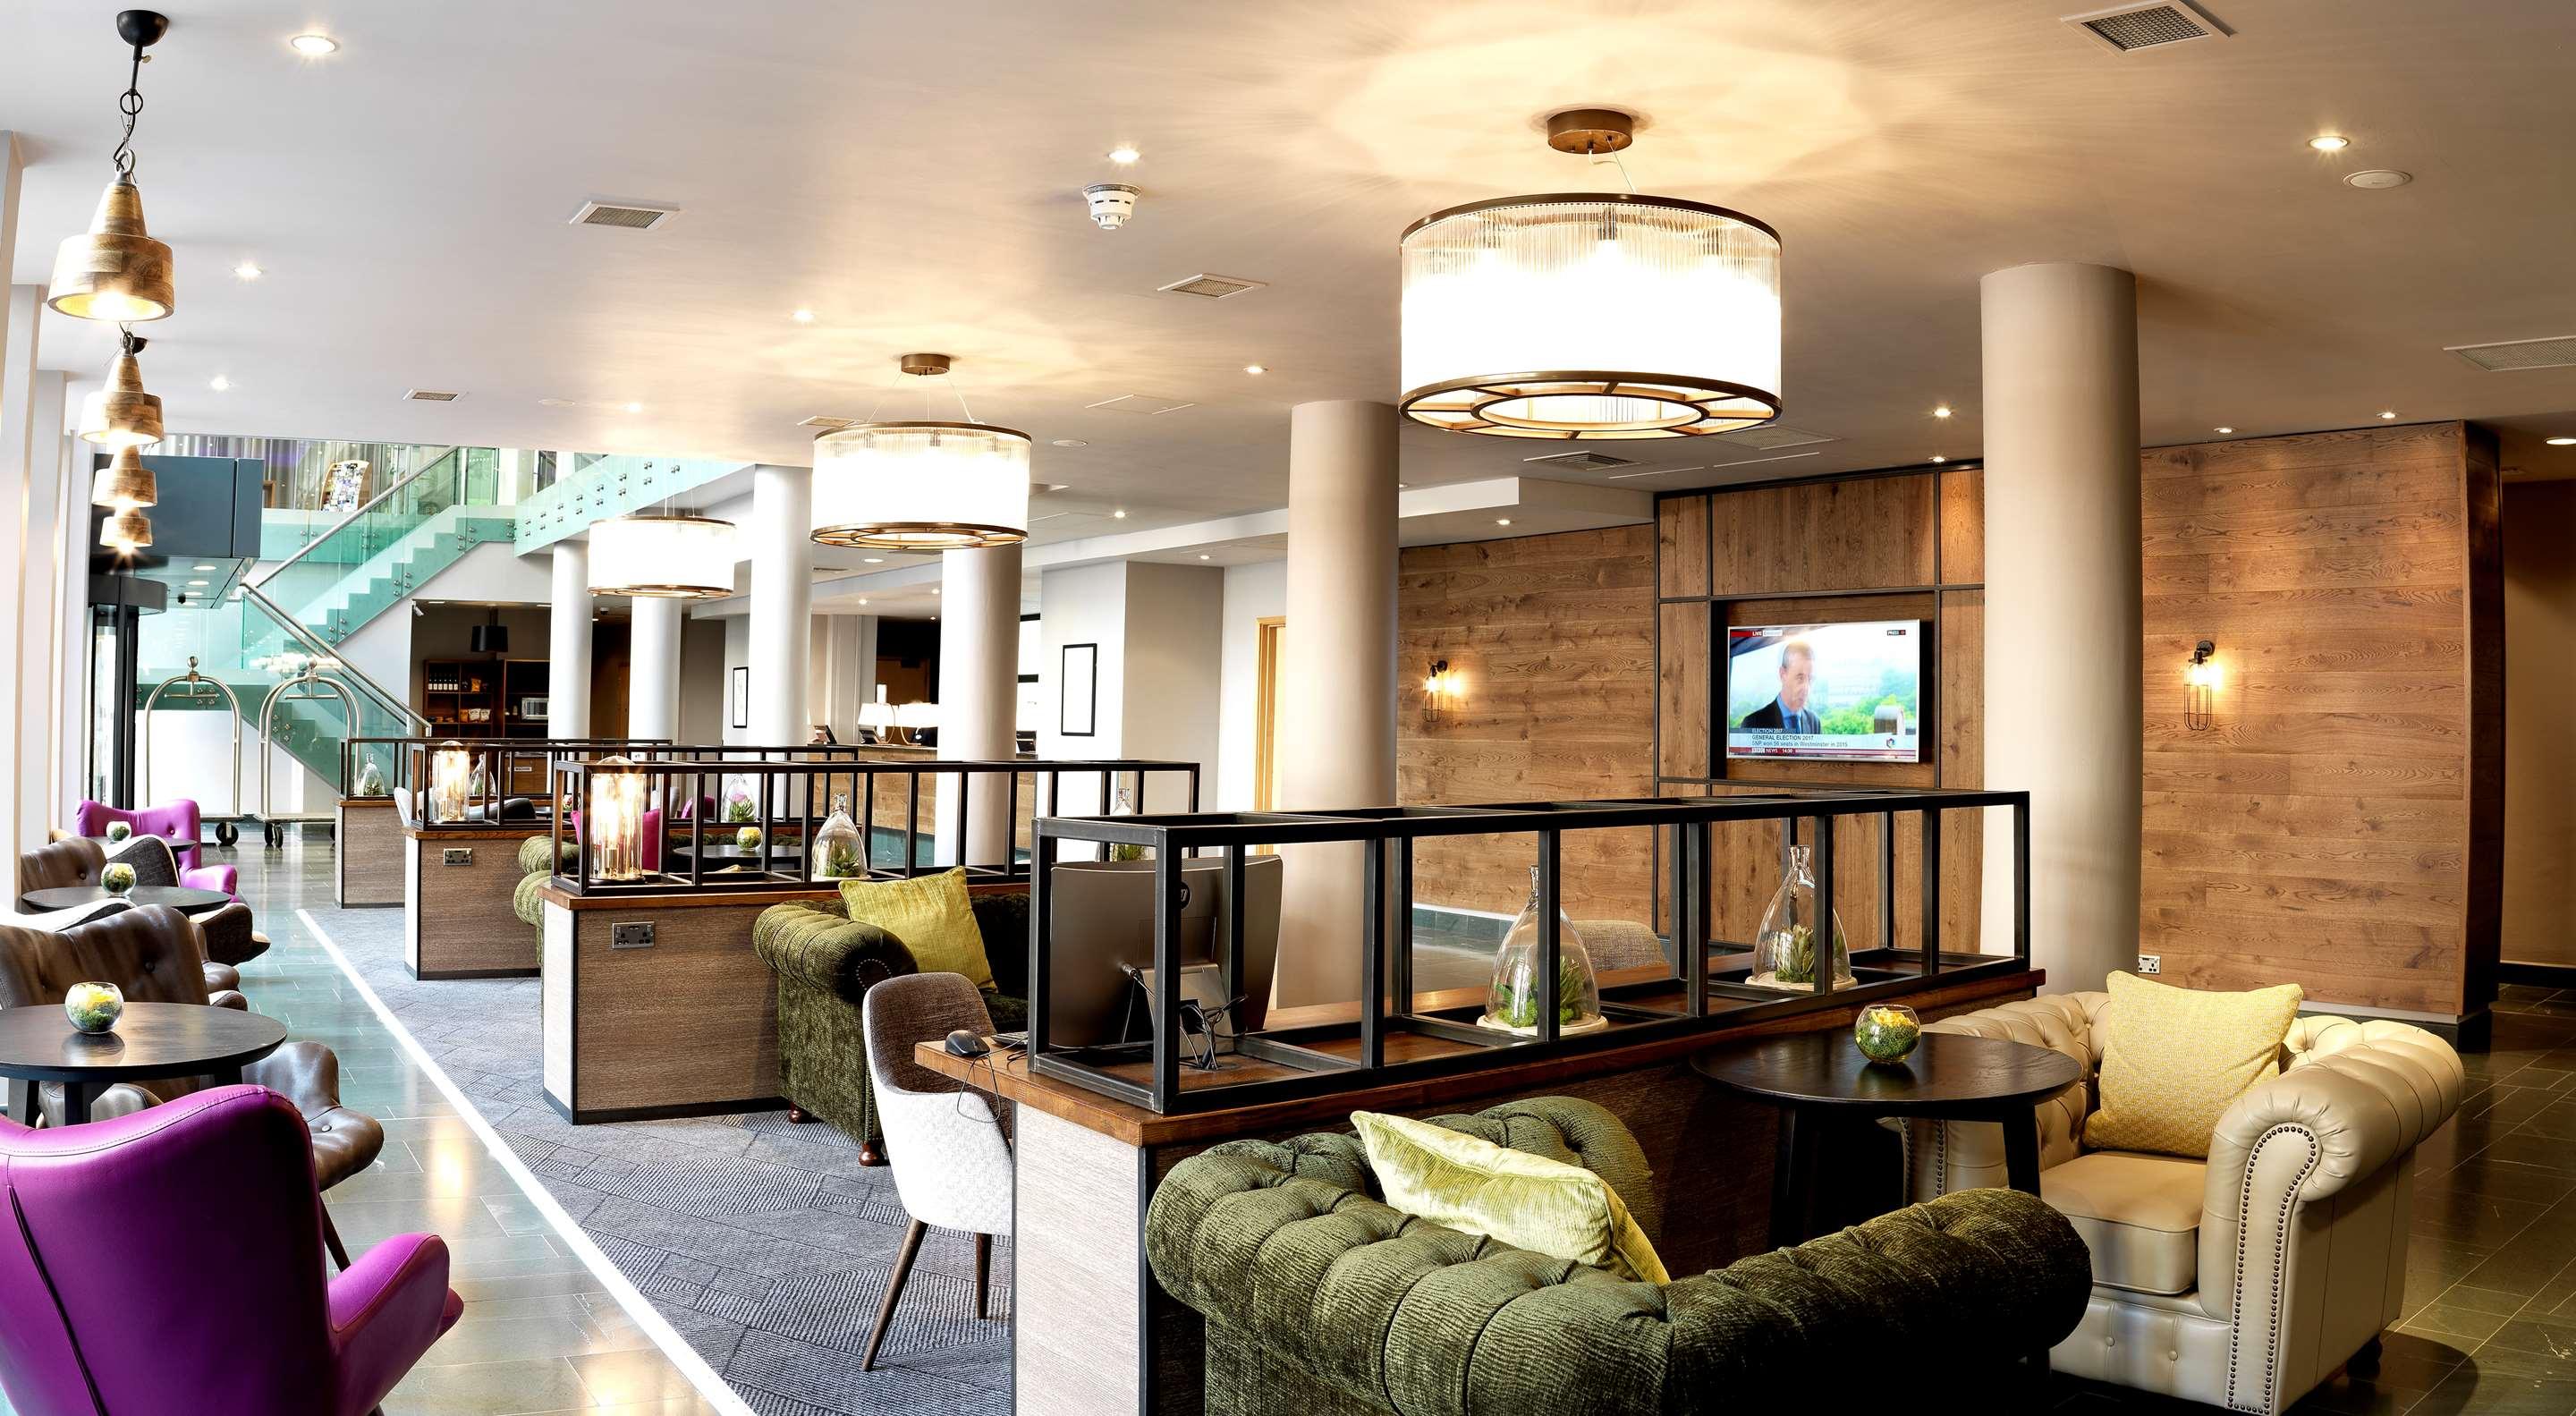 16 Best Hotels in West Bromwich. Hotel Deals from £53/night - KAYAK